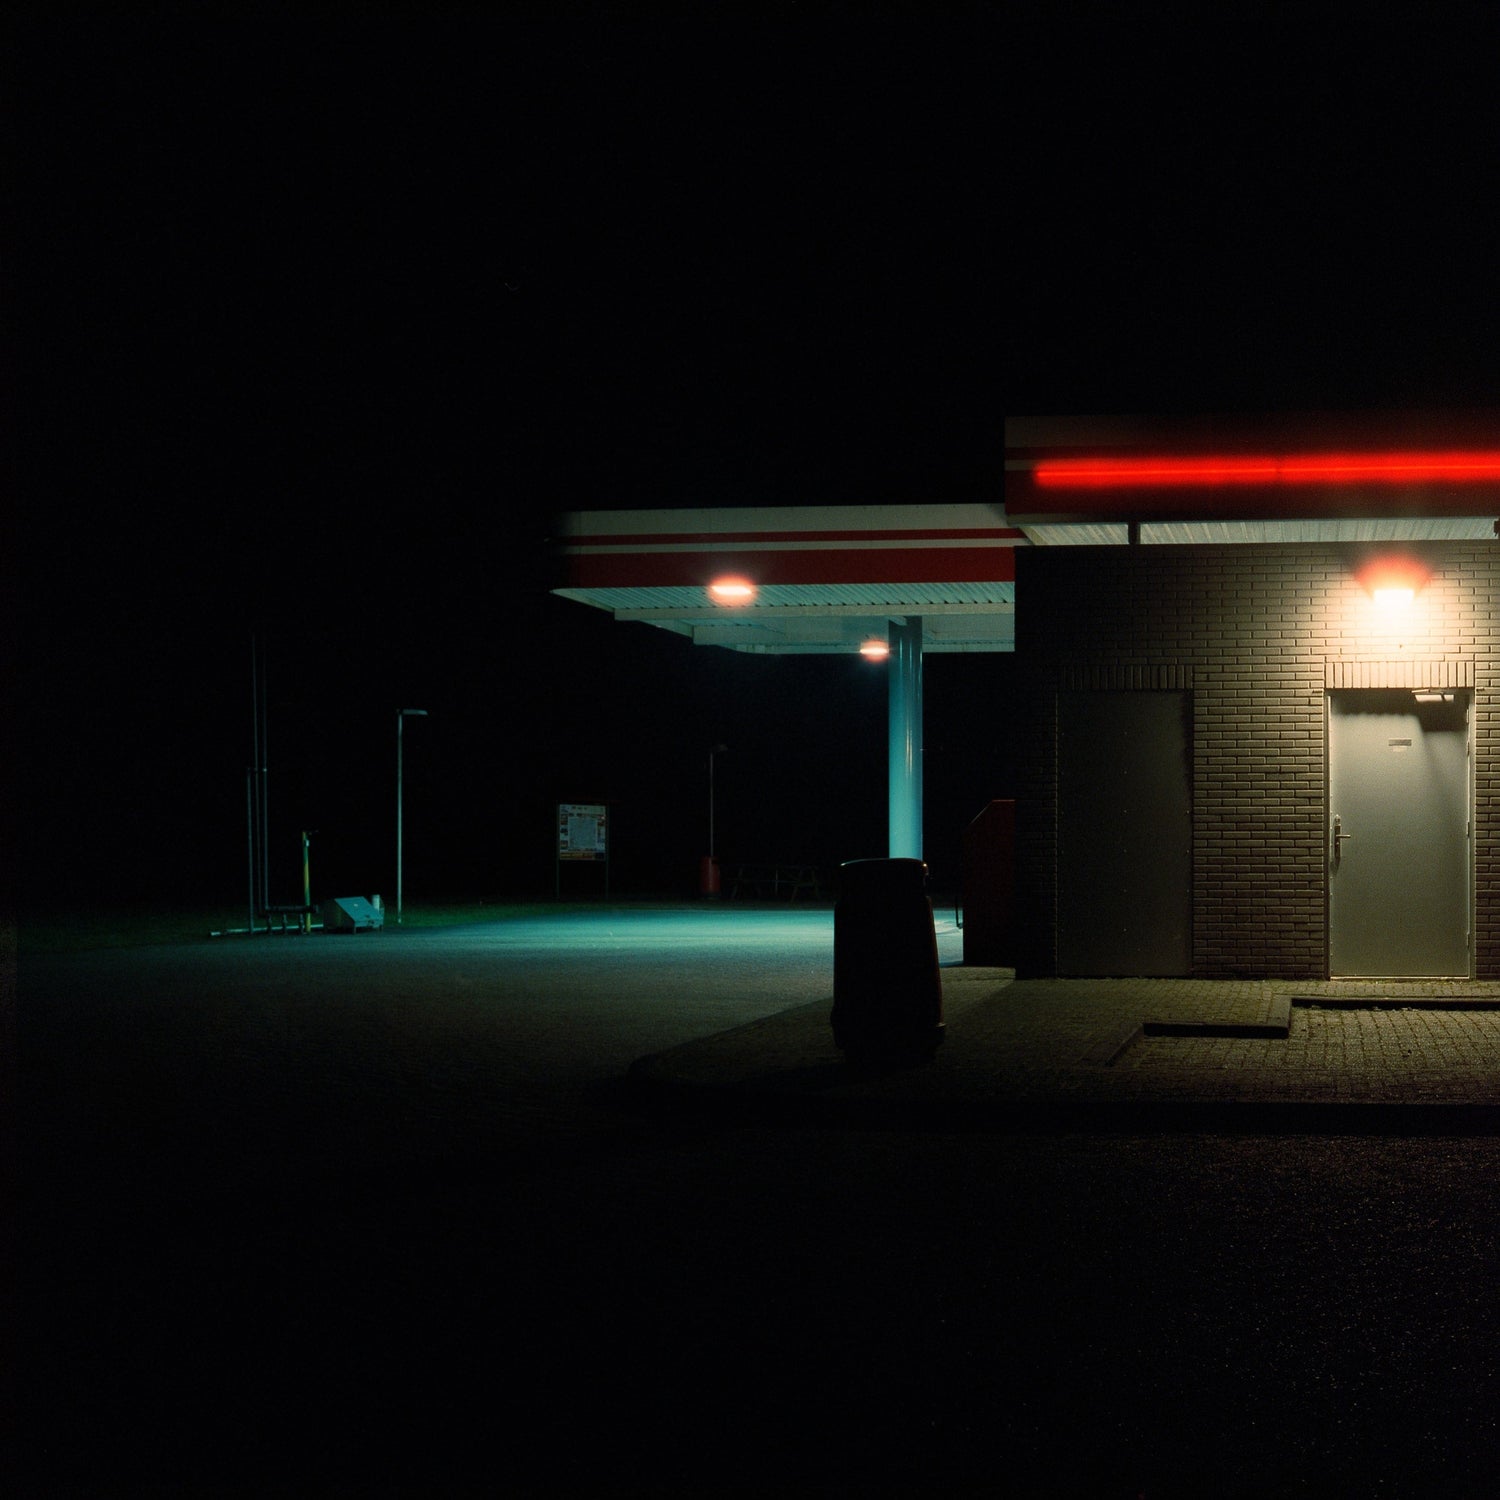 The artwork 'Exterior #2' by Jildo Tim Hof showcasing a deserted parking lot behind a gas station with high contrast lights